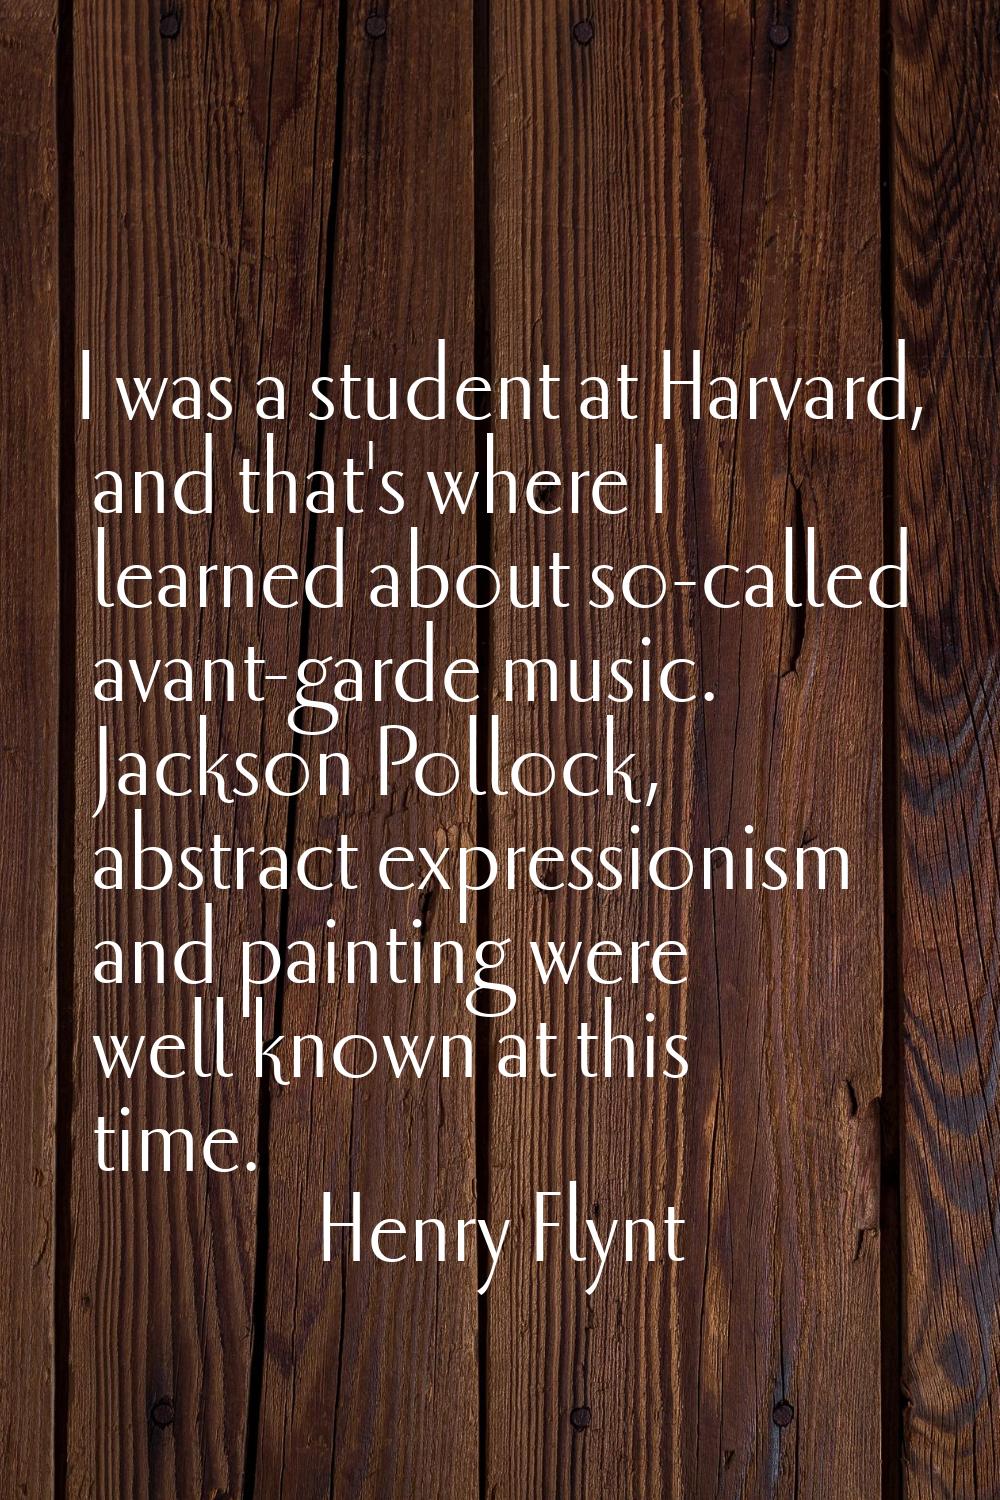 I was a student at Harvard, and that's where I learned about so-called avant-garde music. Jackson P